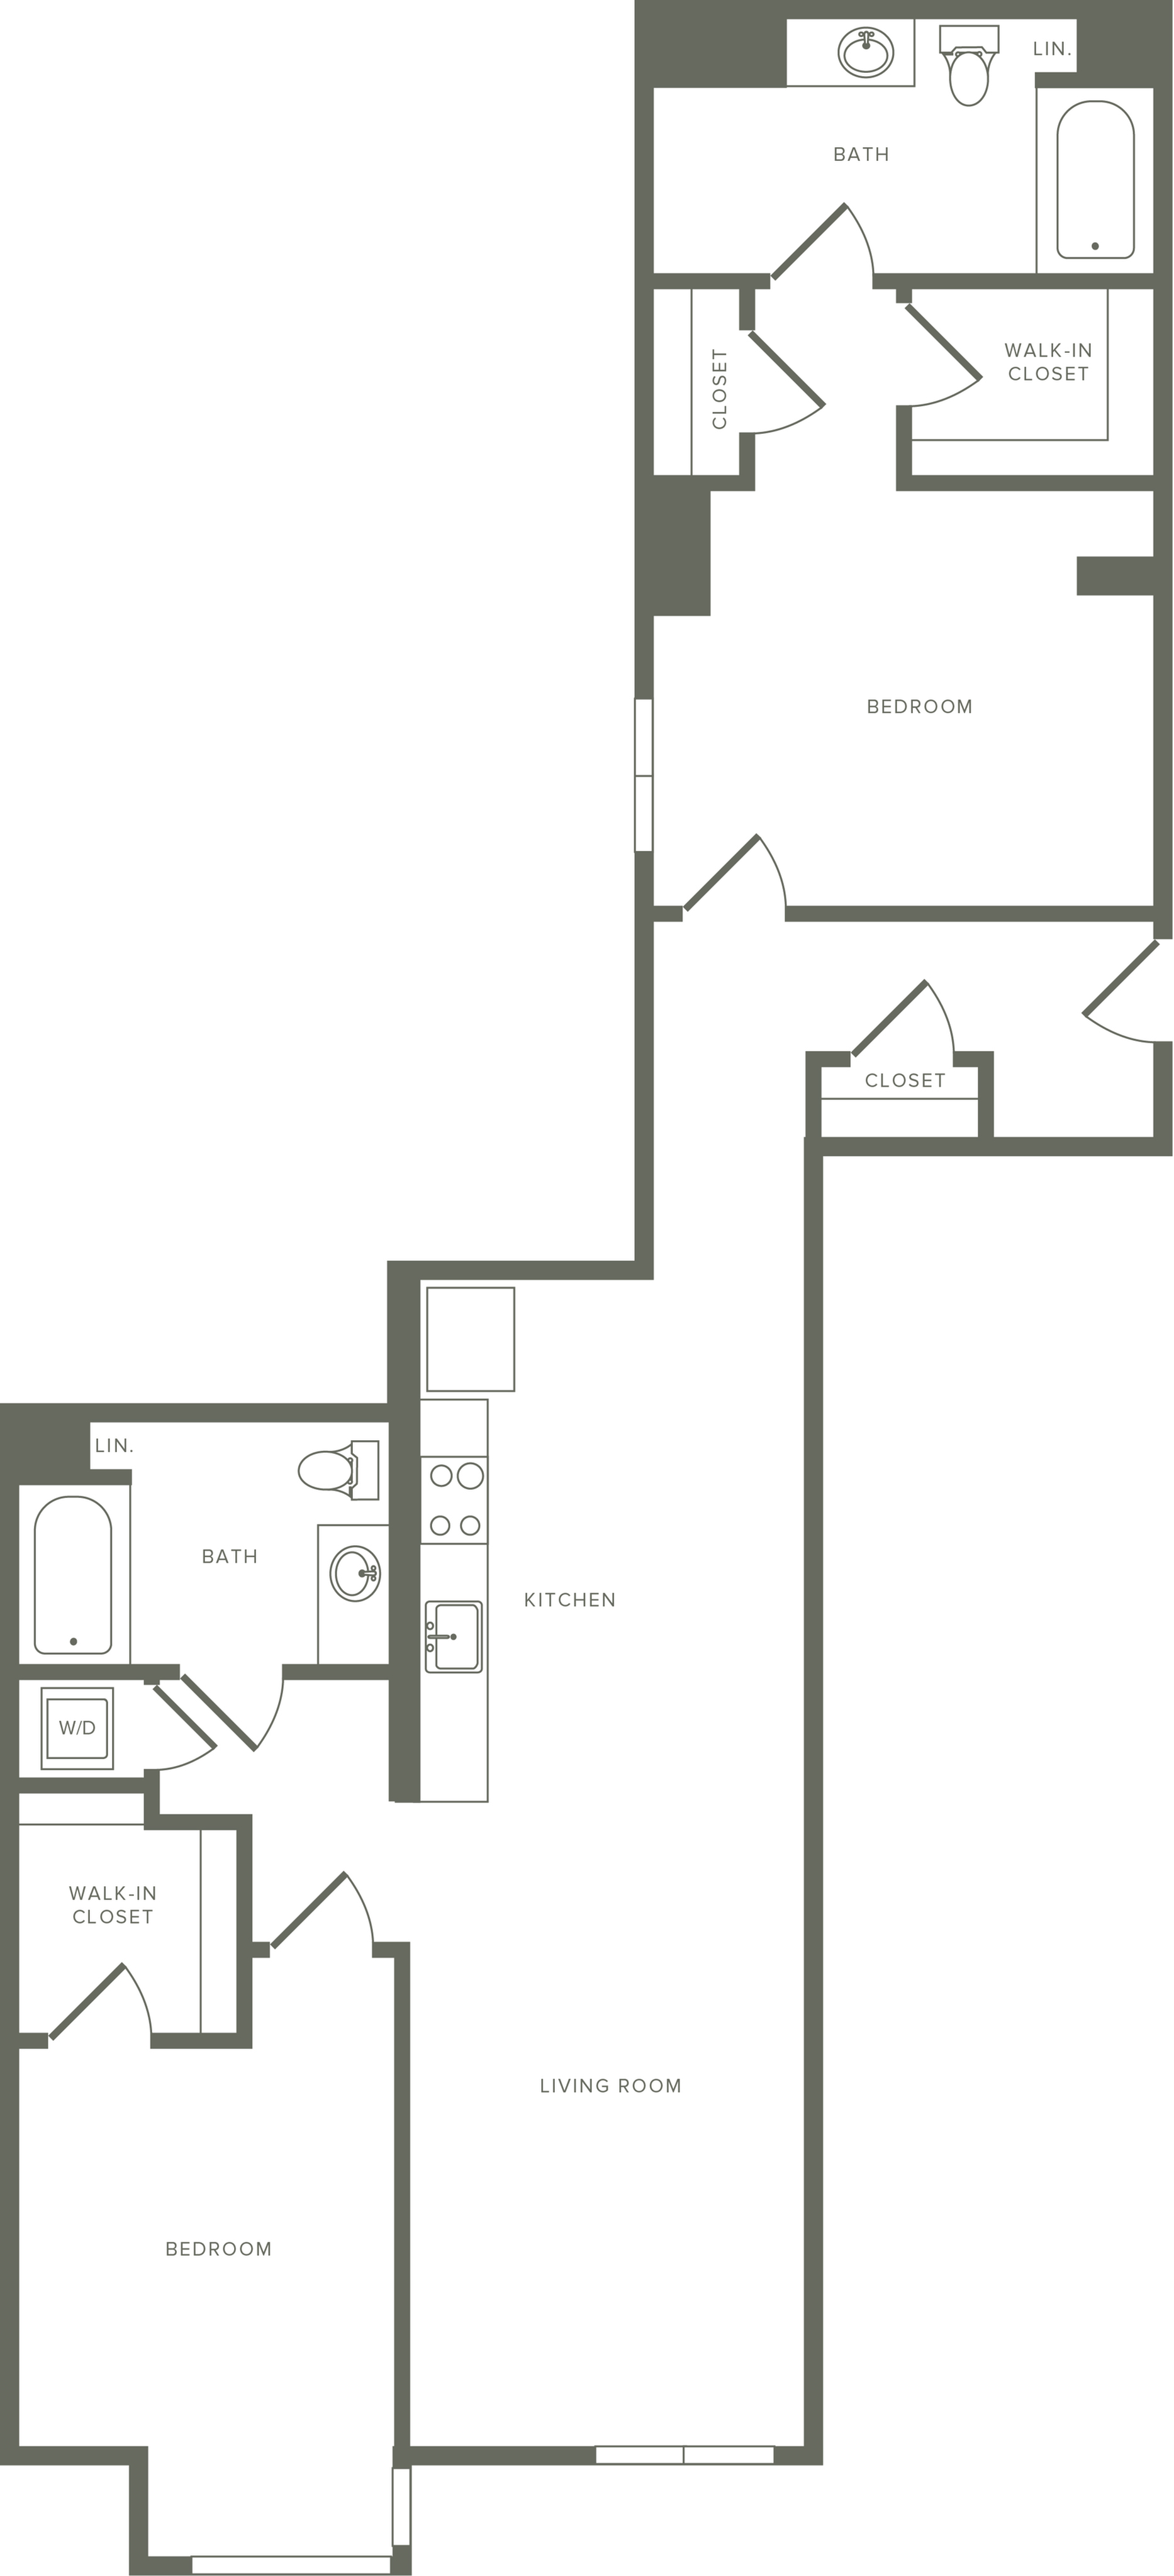 1,291-1,310 square foot two bedroom two bath apartment floorplan image